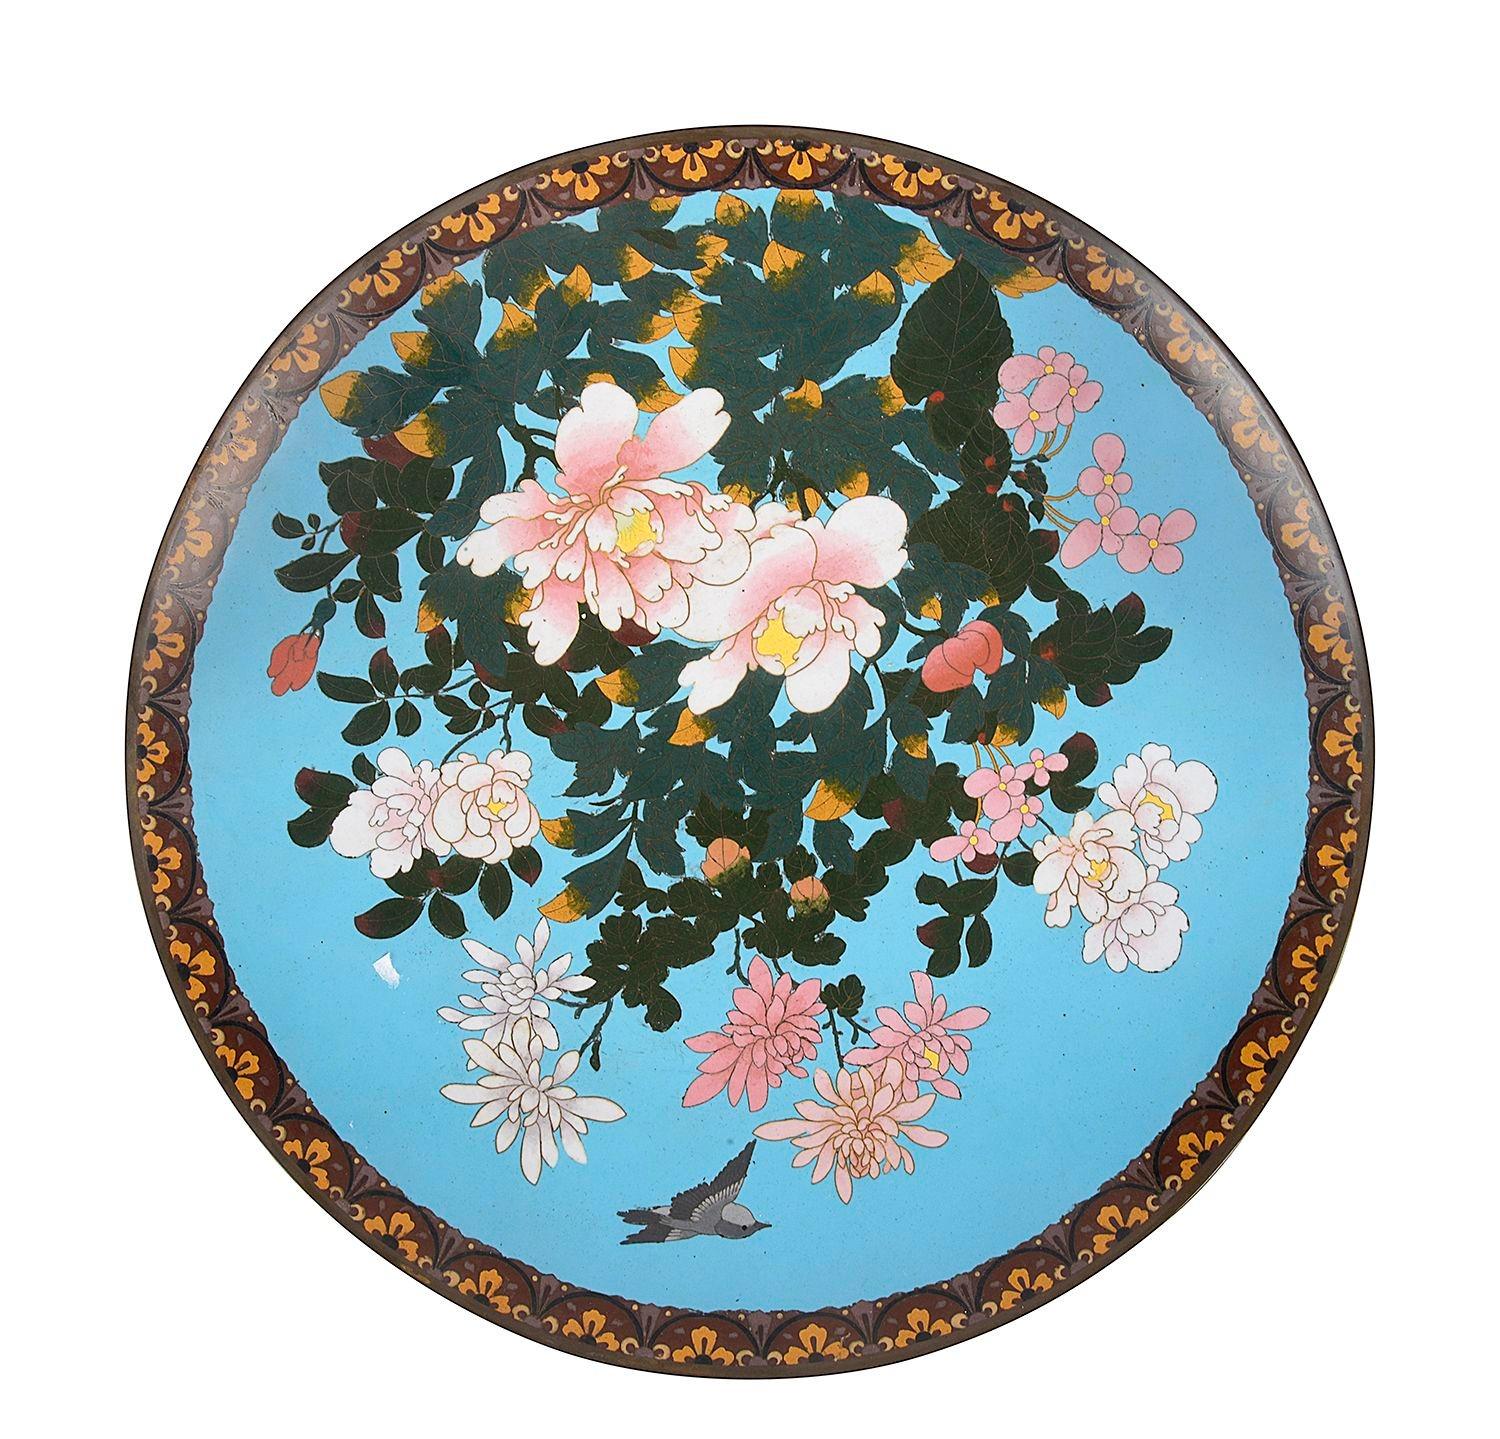 A very good quality and decorative pair of late 19th Century Japanese Cloisonné enamel chargers, each with this wonderful light blue ground, classical motif decoration to the boarders. Birds flying among exotic flowers and foliage.

Batch 76 C/C